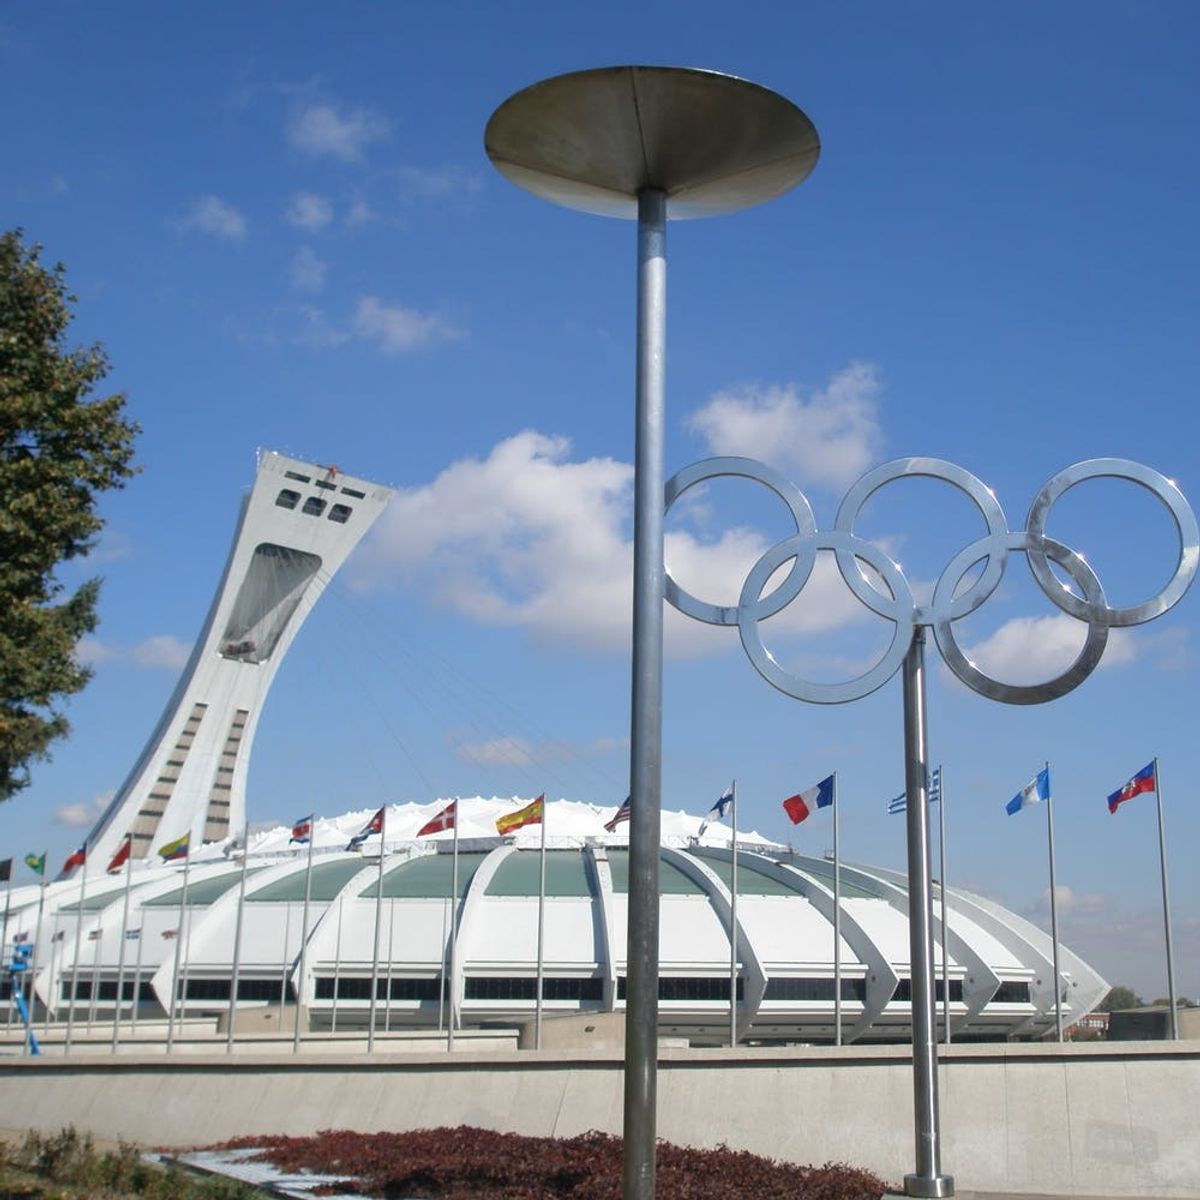 So Many People Are Fleeing the US to Canada That Montreal’s Olympic Stadium Has Been Turned into a Shelter